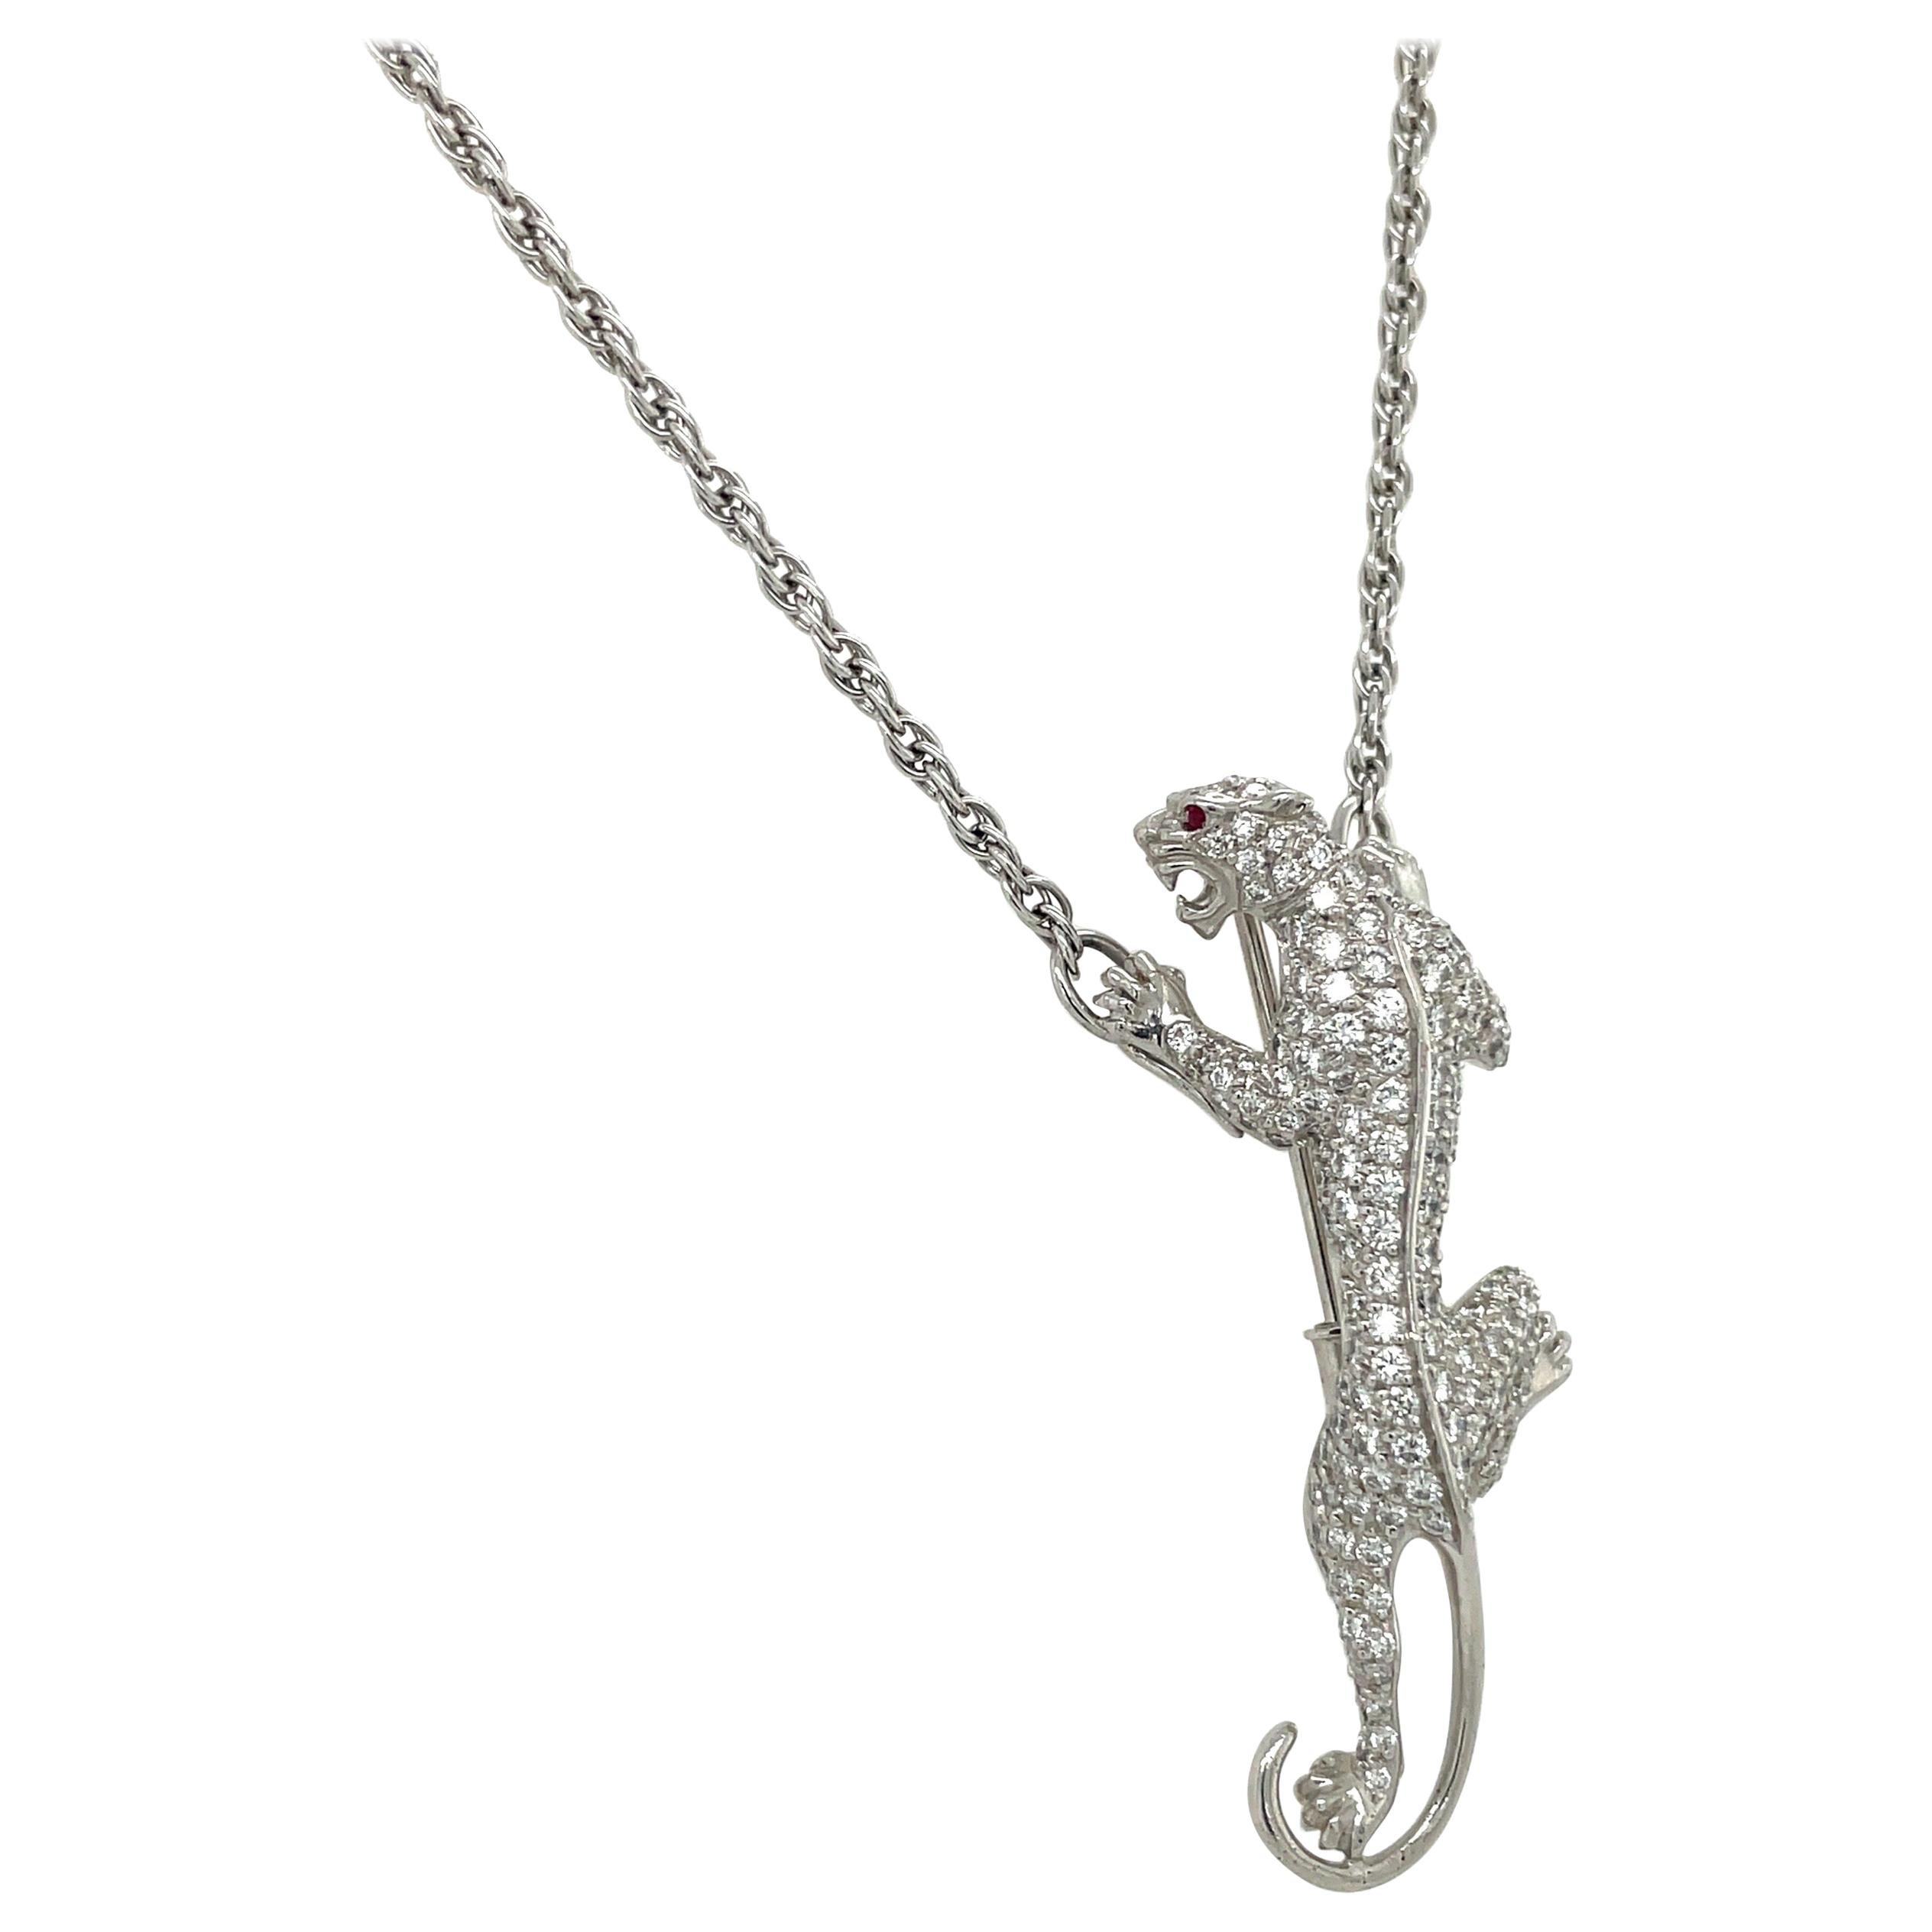 Carrera y Carrera 18kt White Gold 1.56ct. Diamond Panther Pendant / Brooch